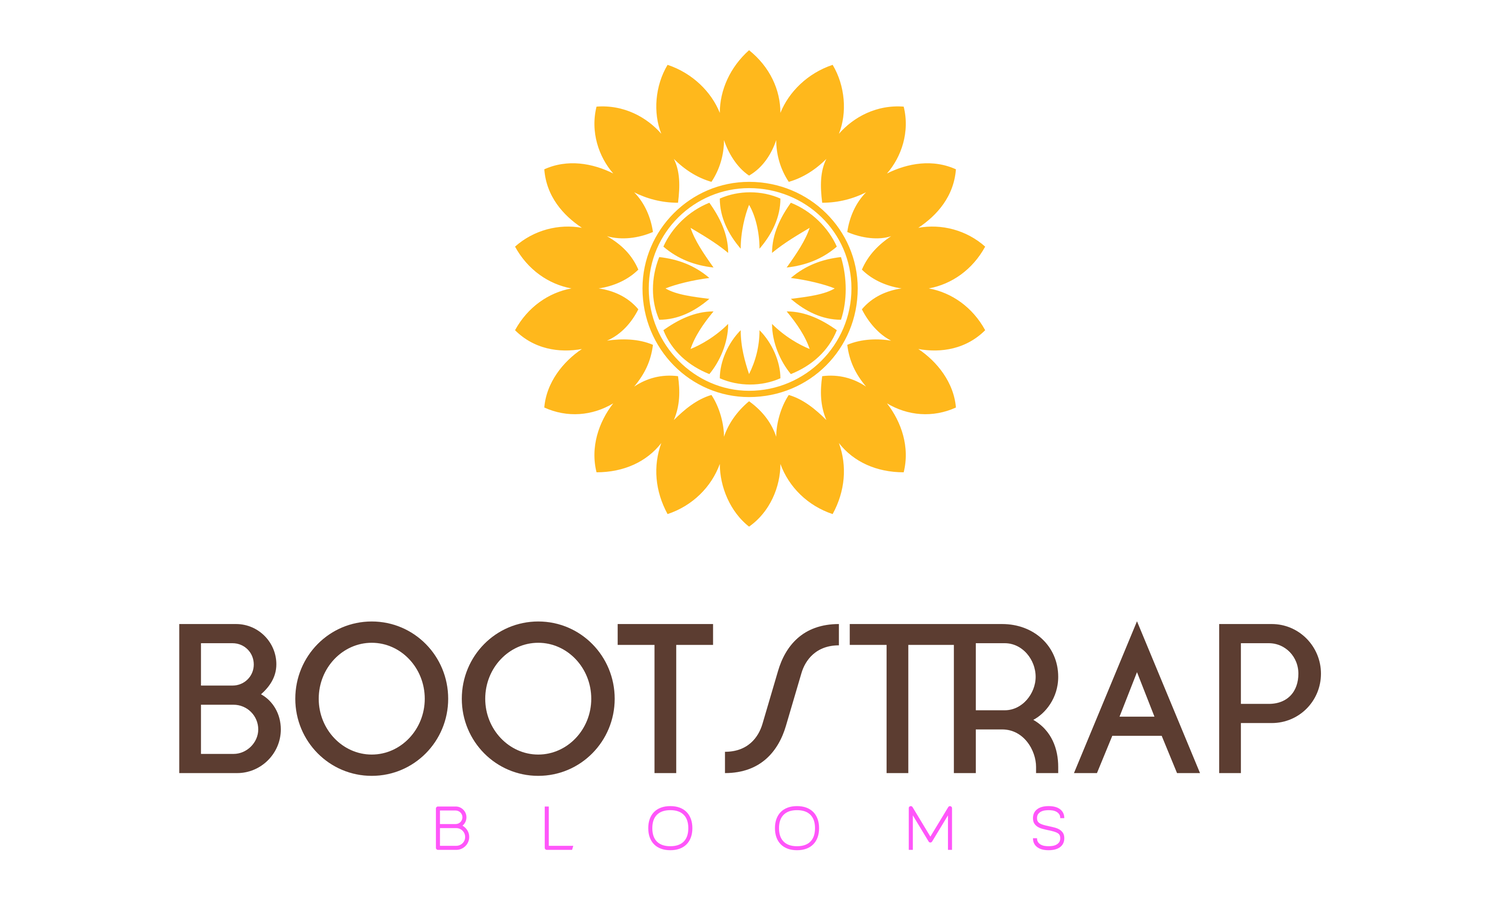 BOOTSTRAP BLOOMS